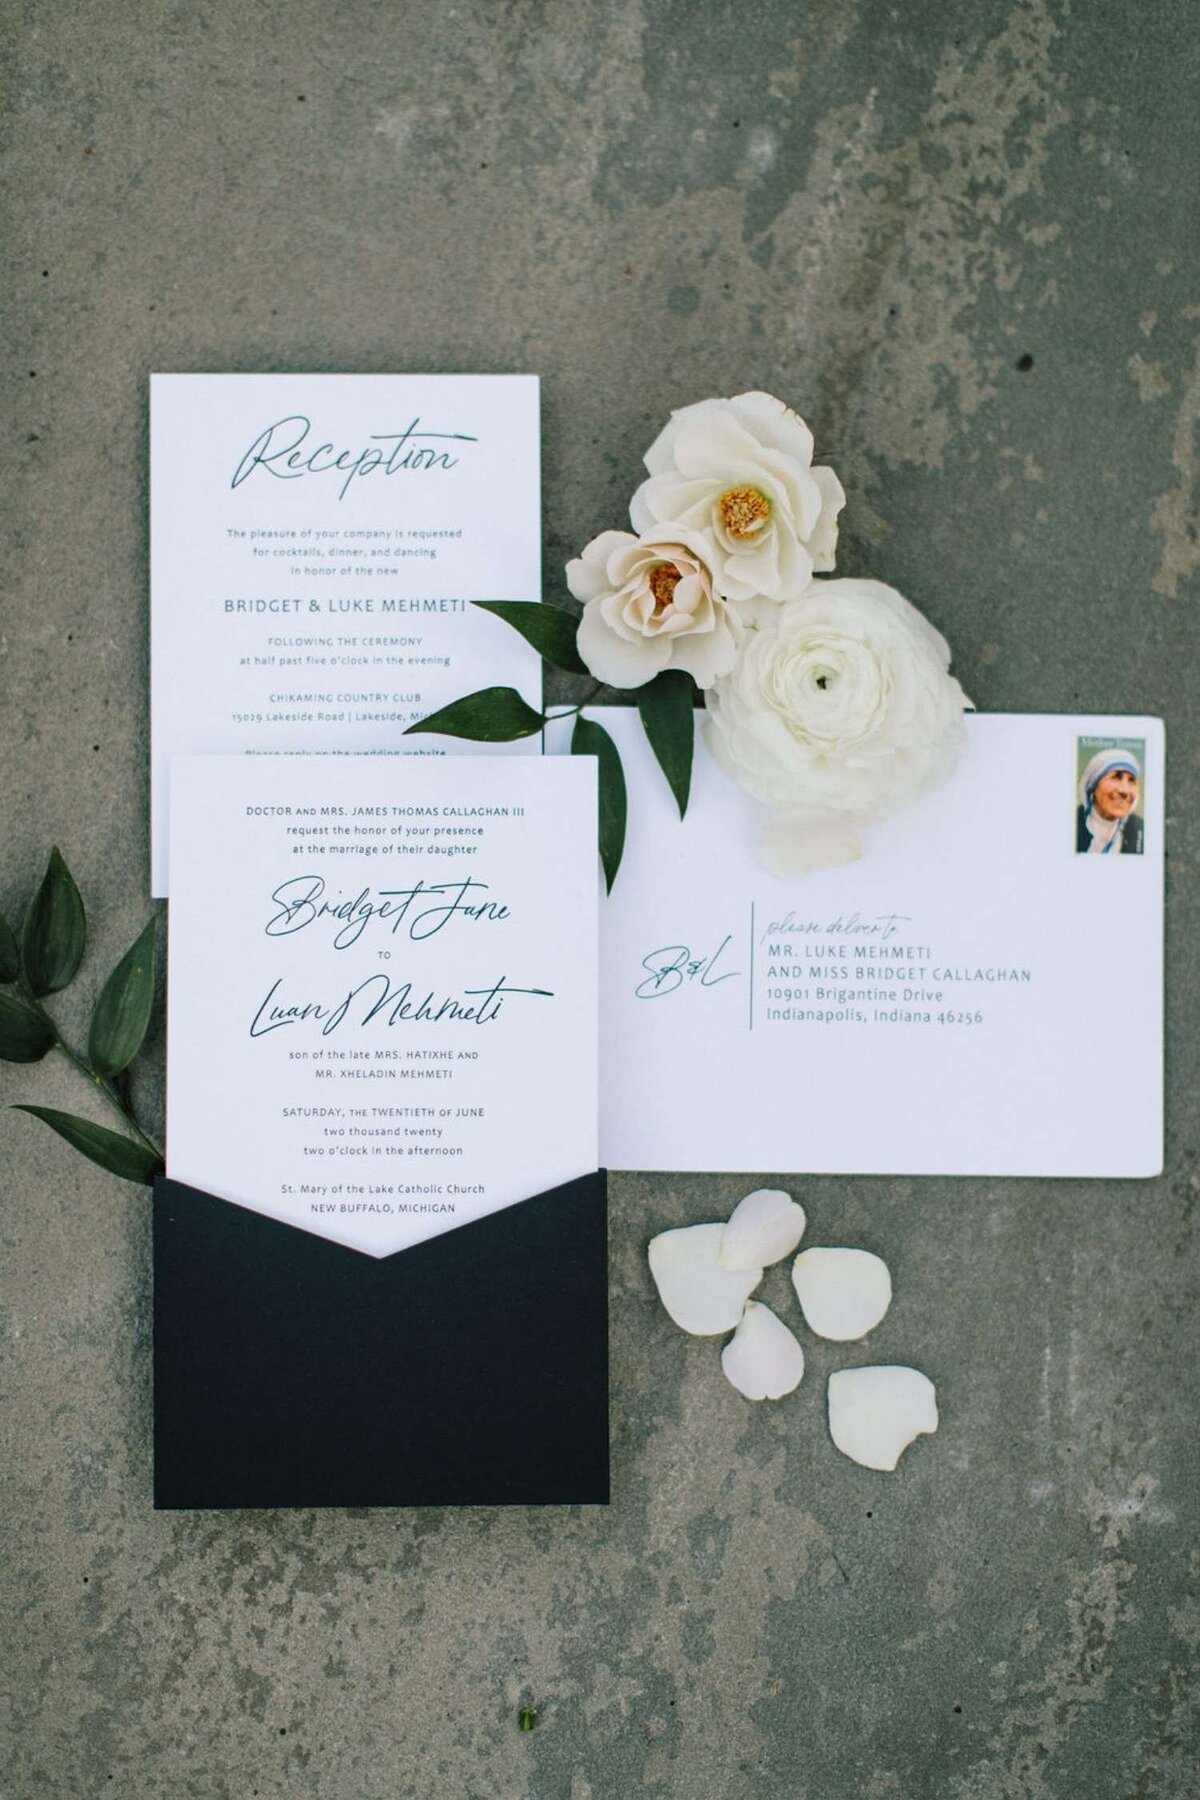 Classic and Modern Wedding Invitation Suite in Black and White for a Luxury Michigan Lakefront Golf Club Wedding.